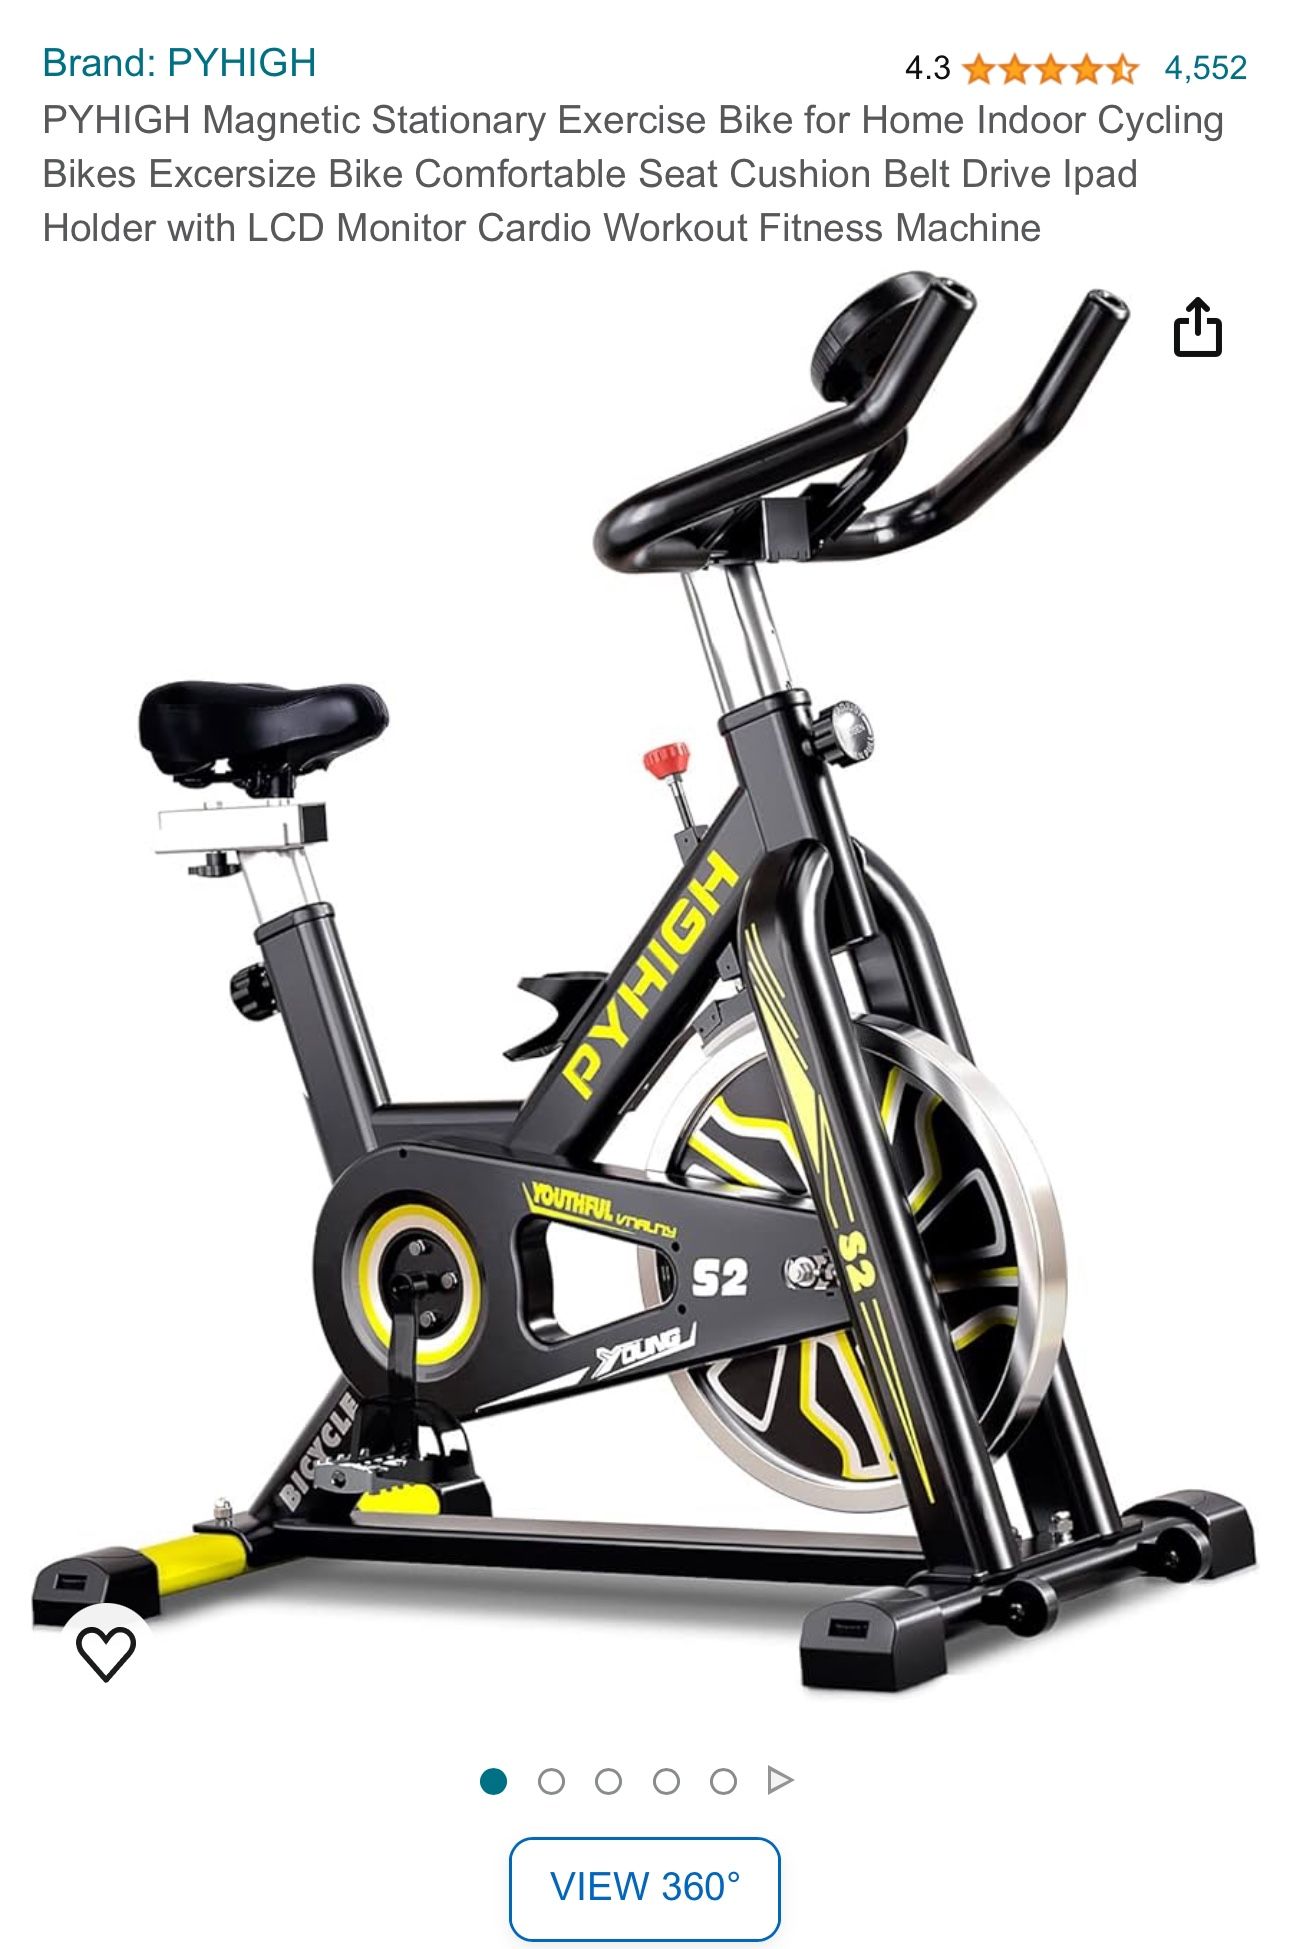 PYHIGH Magnetic Stationary Exercise Bike for Home